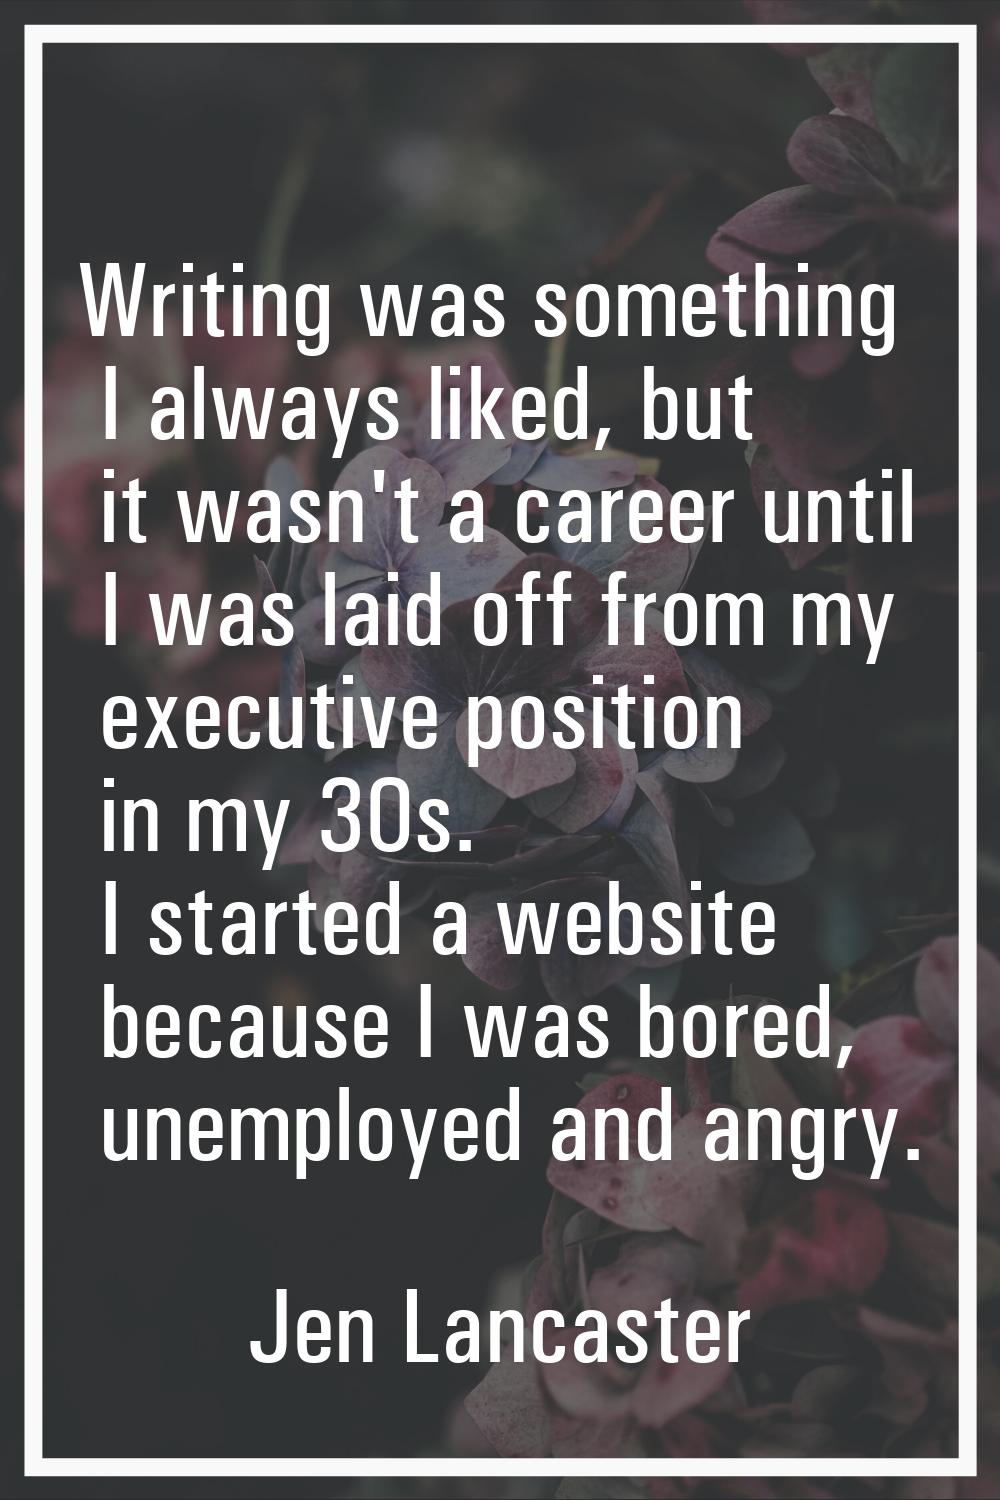 Writing was something I always liked, but it wasn't a career until I was laid off from my executive